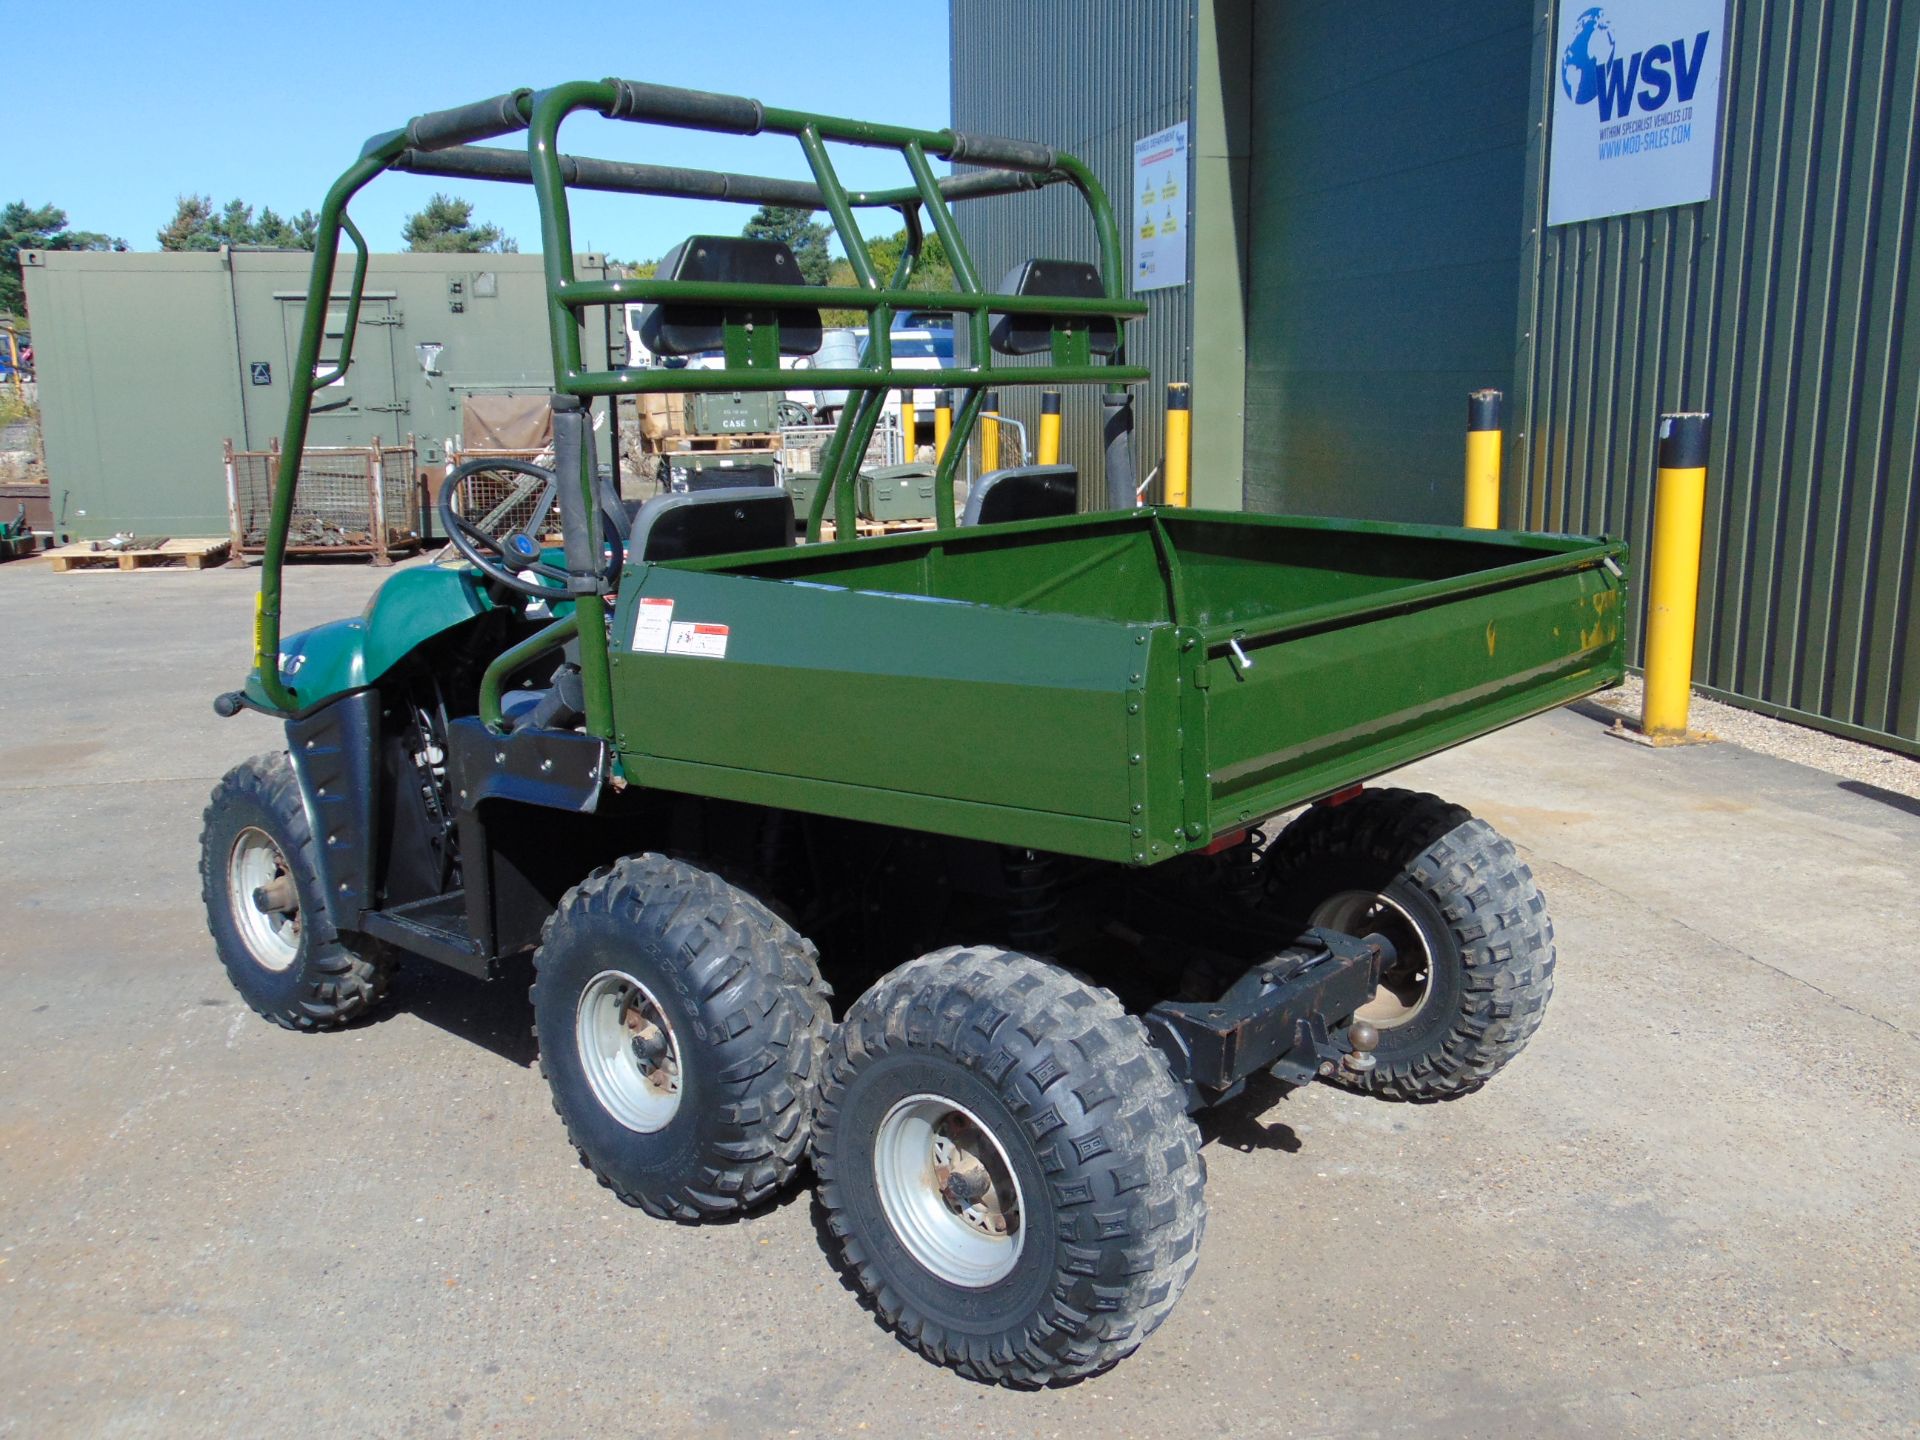 Polaris 6x6 Ranger Utility Vehicle Only 226 Hours! From National Grid. - Image 7 of 27